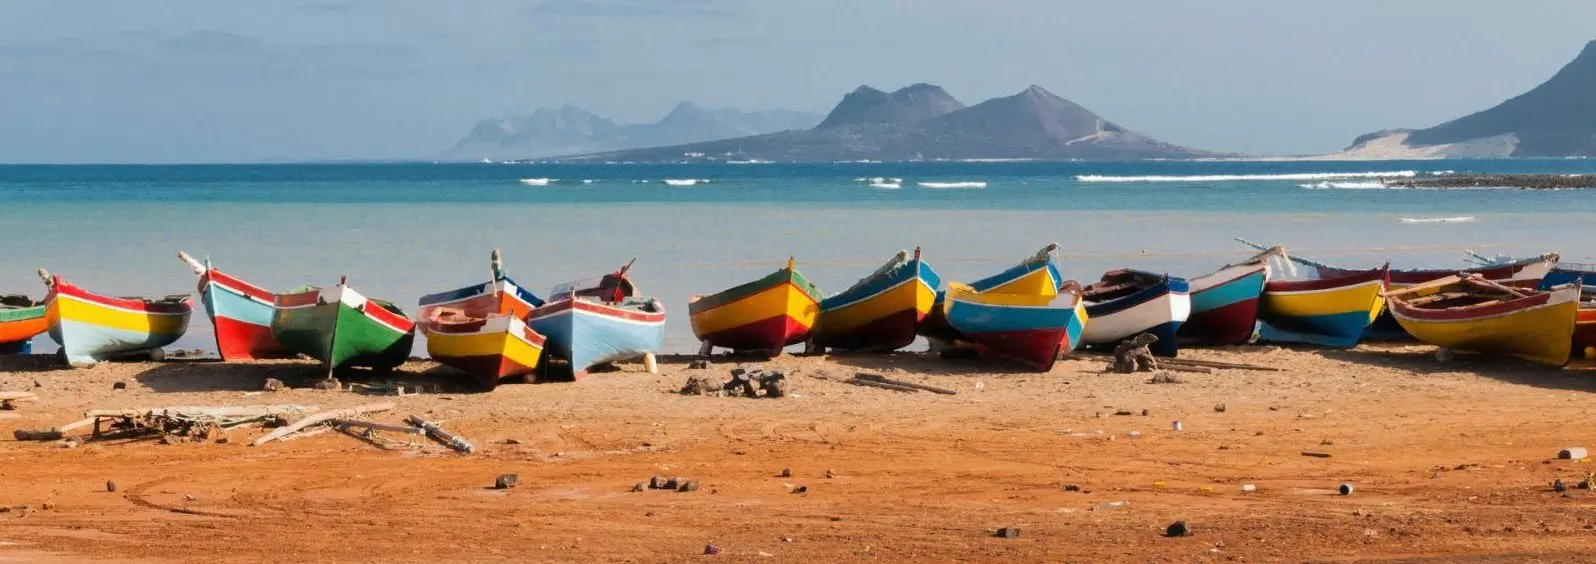 The Islands of Cape Verde Cruise